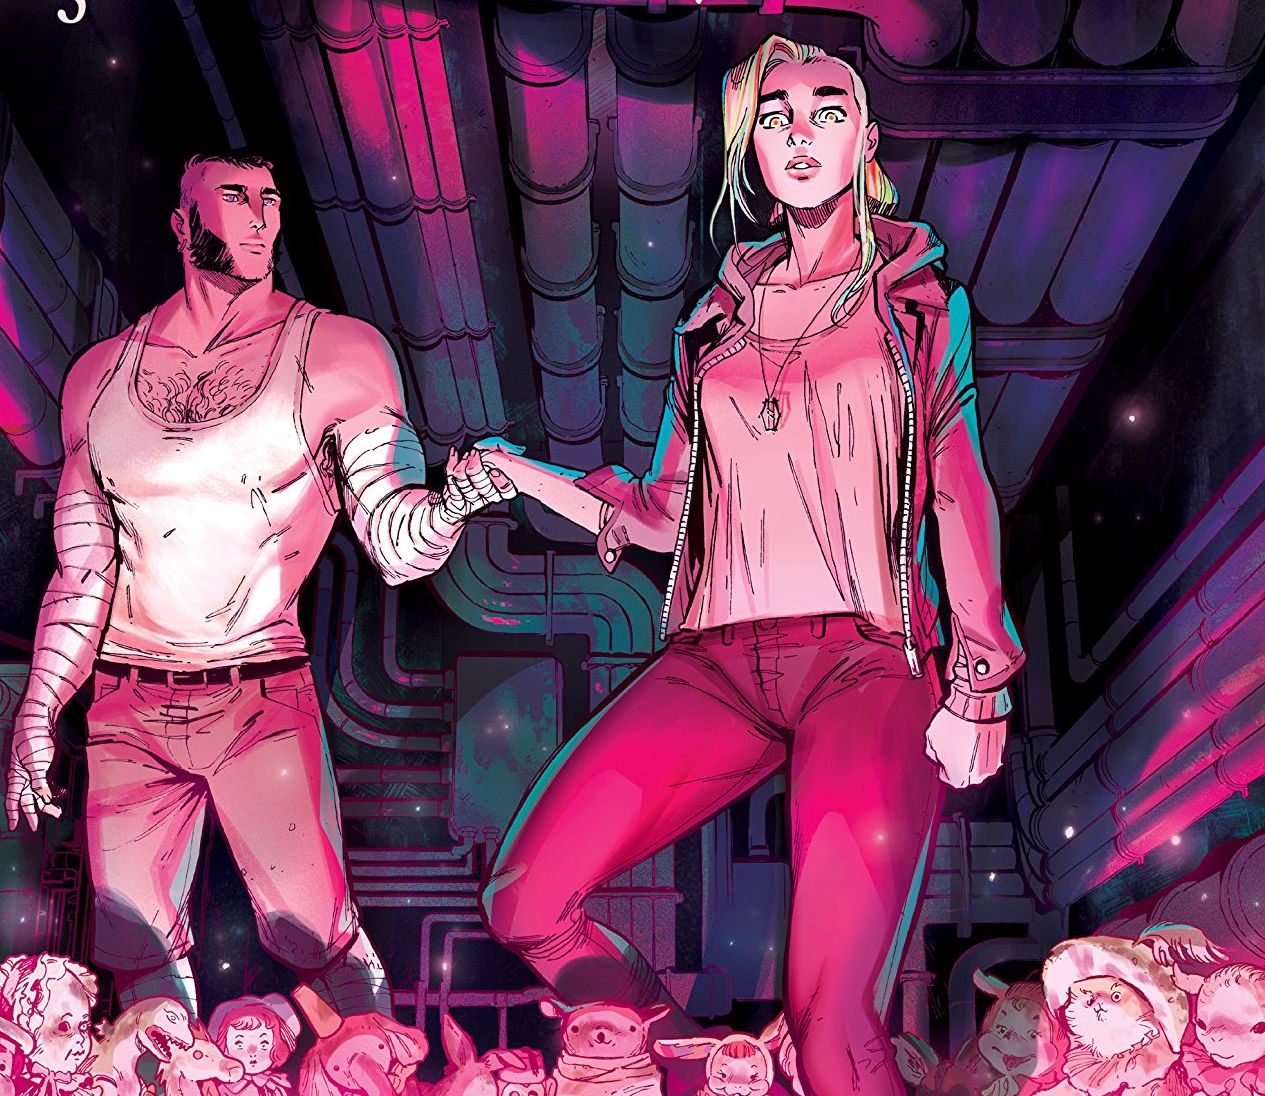 Nomen Omen #3 review: Abracadabra! Now you have a deeply human story